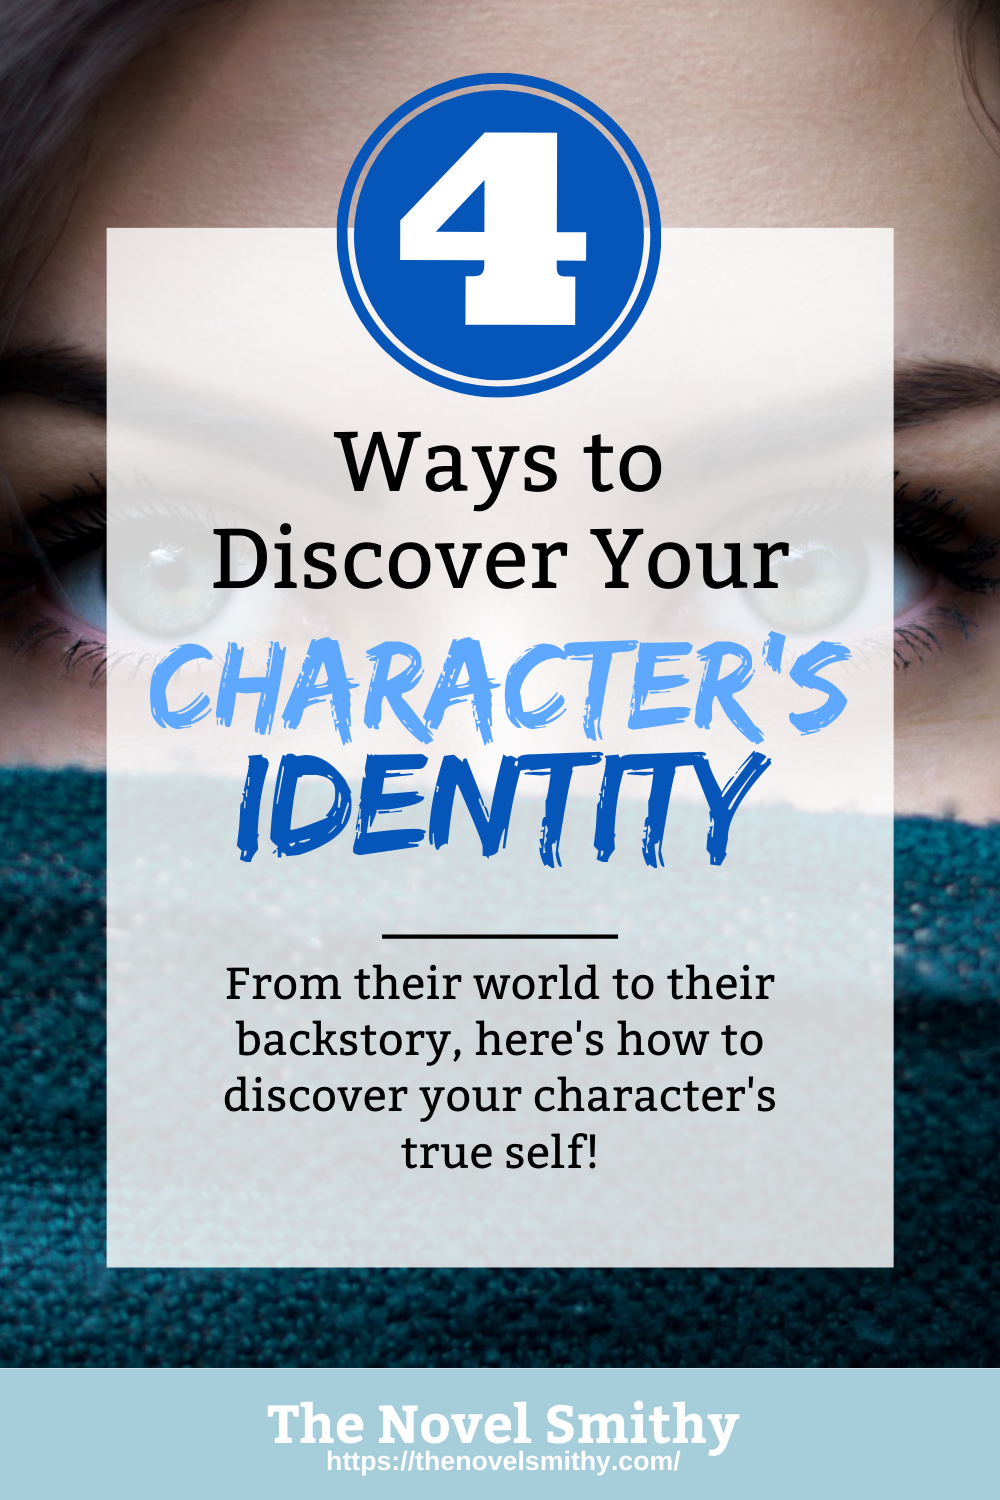 4 Ways to Discover Your Protagonist’s Identity